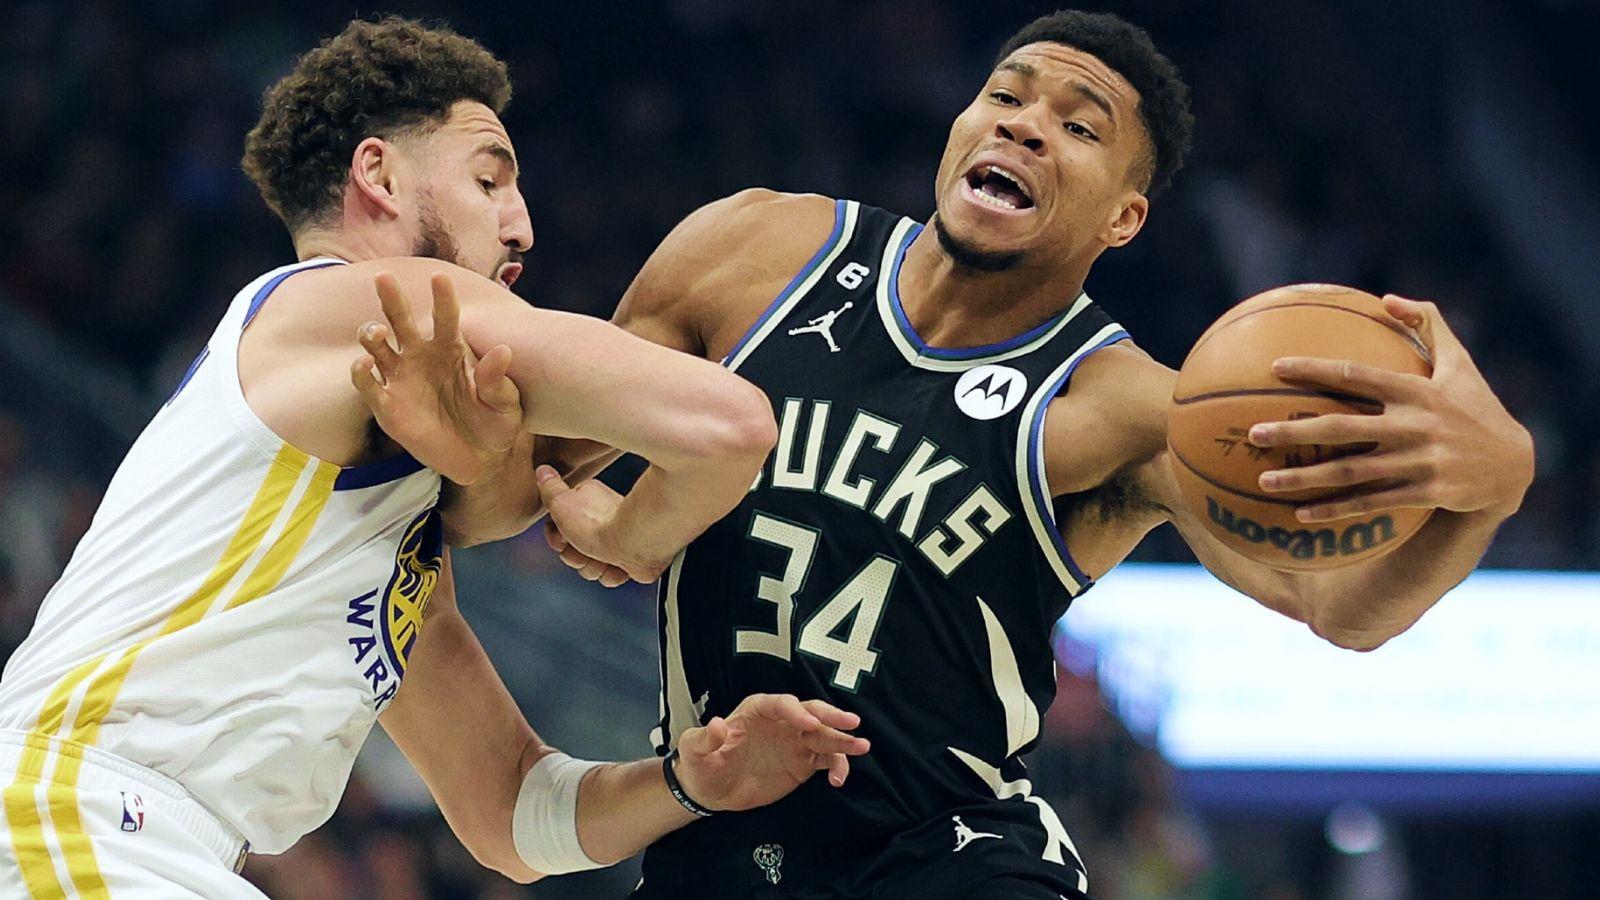 Giannis Antetokounmpo defended by Klay Thompson in regular season action.